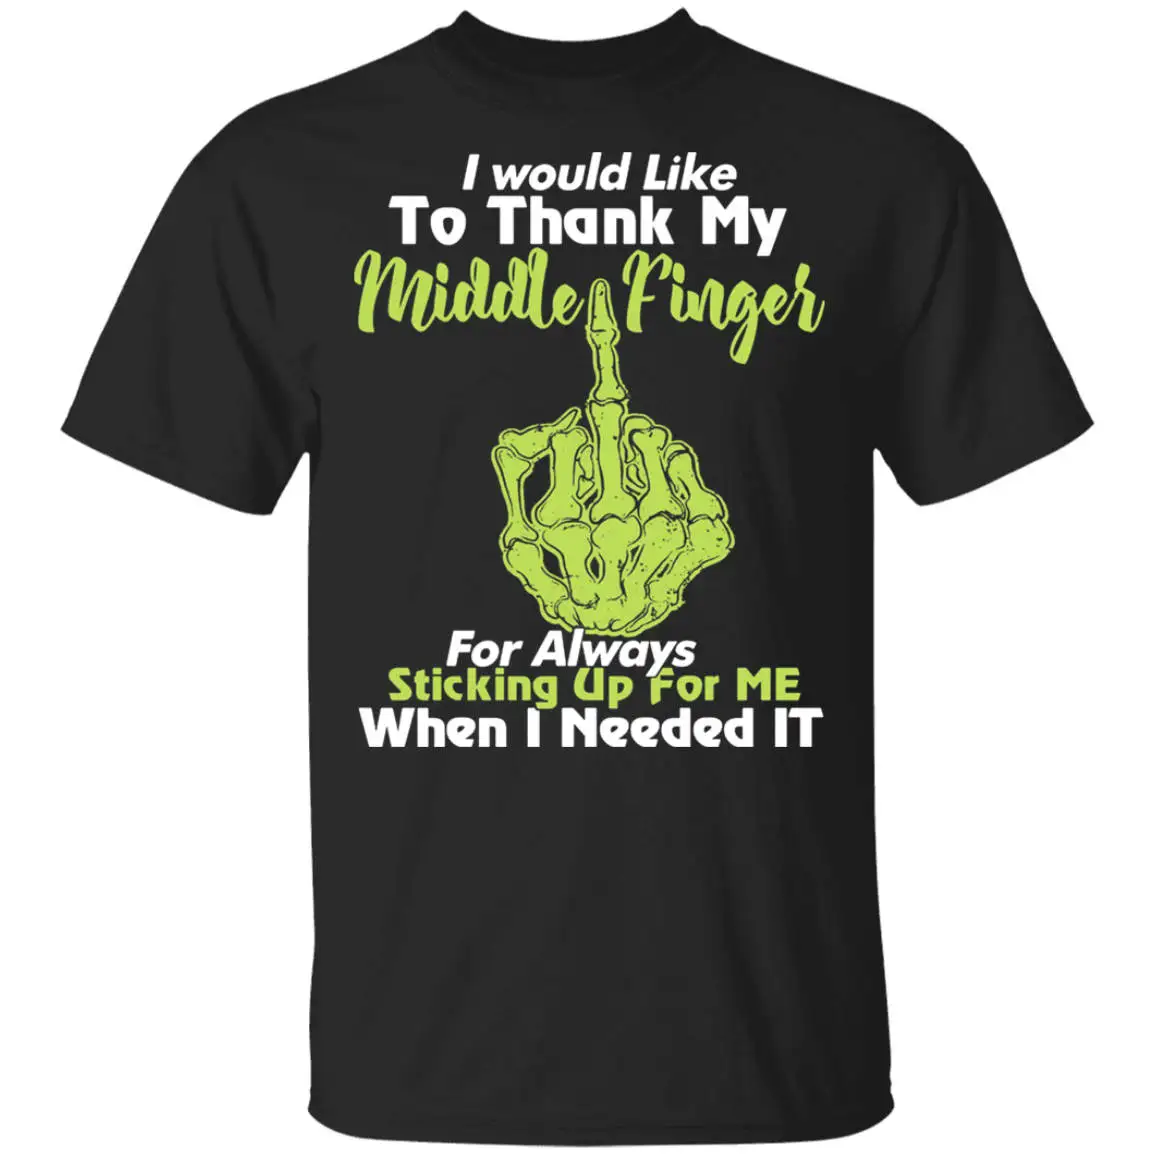 

I Would Like To Thank My Middle Finger For Always Sticking Up For Me T-Shirt. Summer Cotton Short Sleeve O-Neck mens T Shirt New